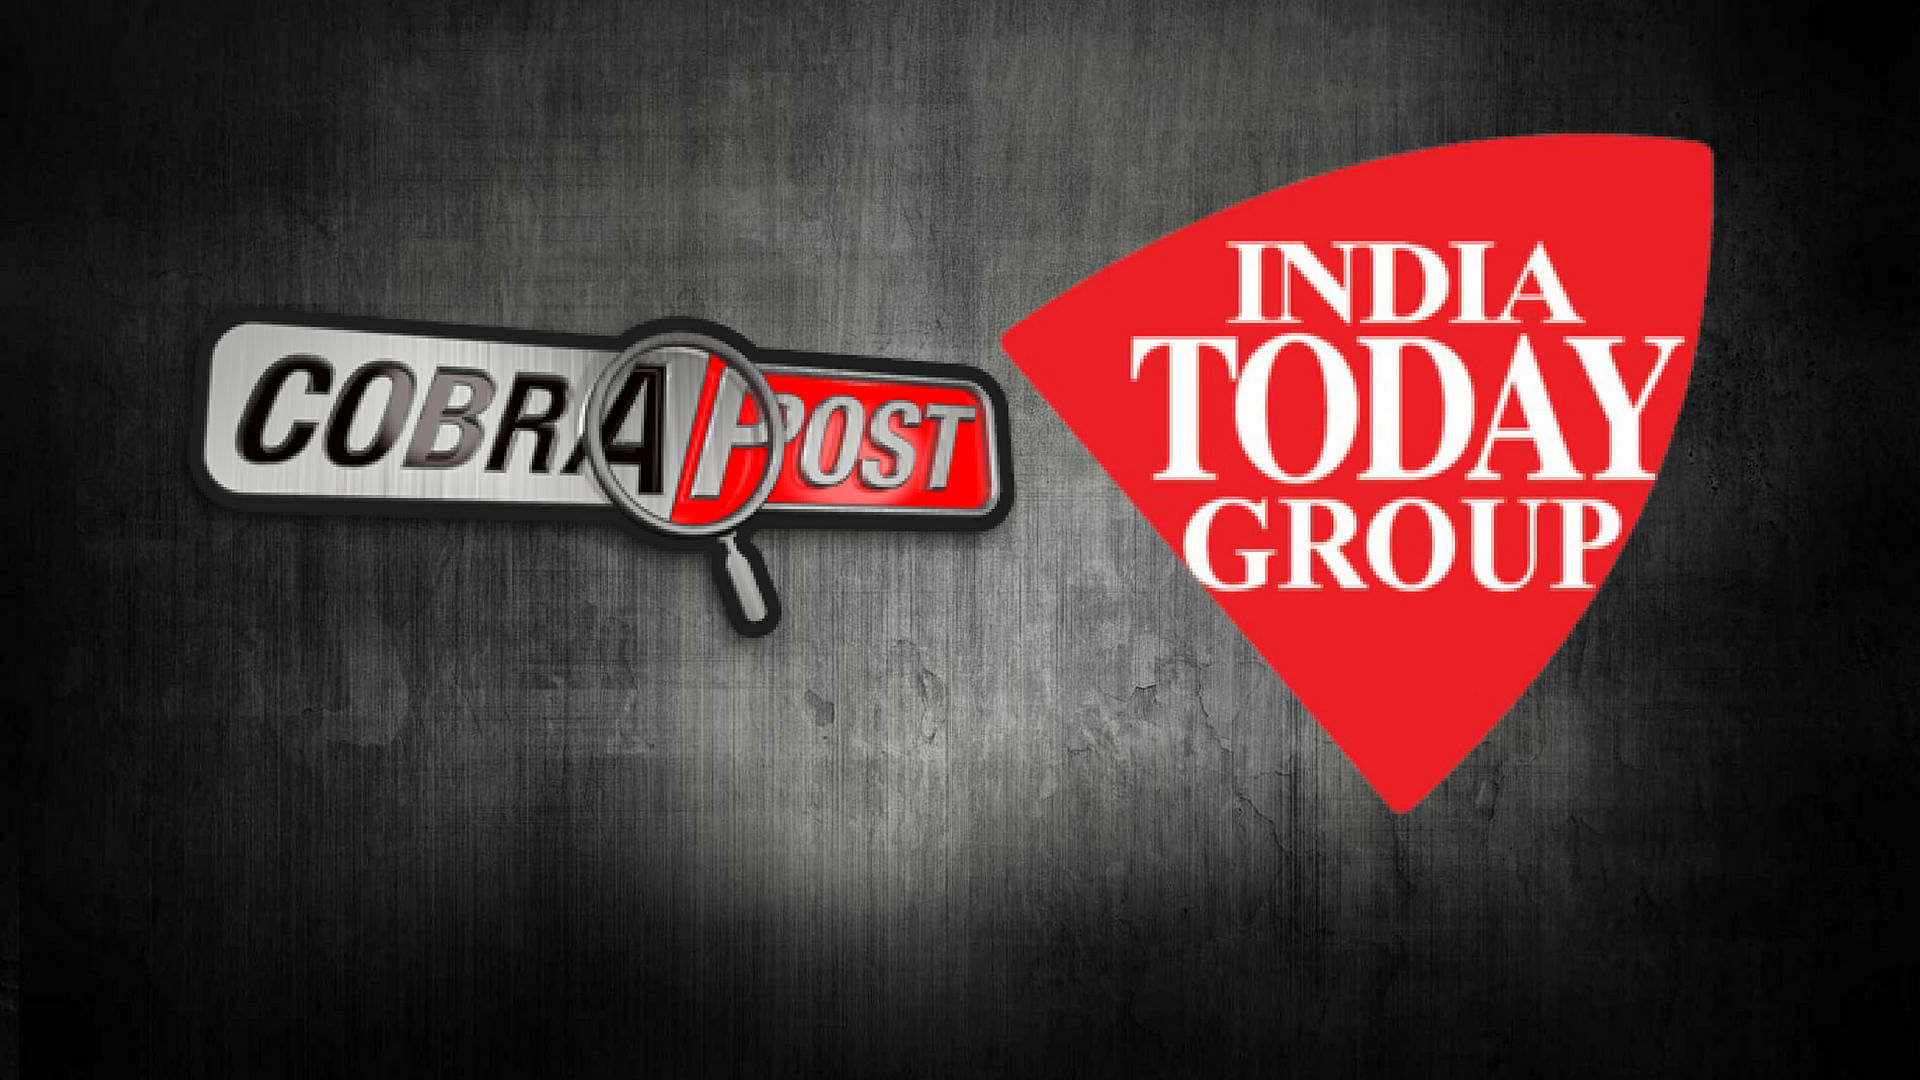 In Cobrapost’s video, a senior official of the India Today group allegedly agreed to run a paid “advertising campaign” with Hindutva and political overtones in exchange for a sum of Rs 275 crore.